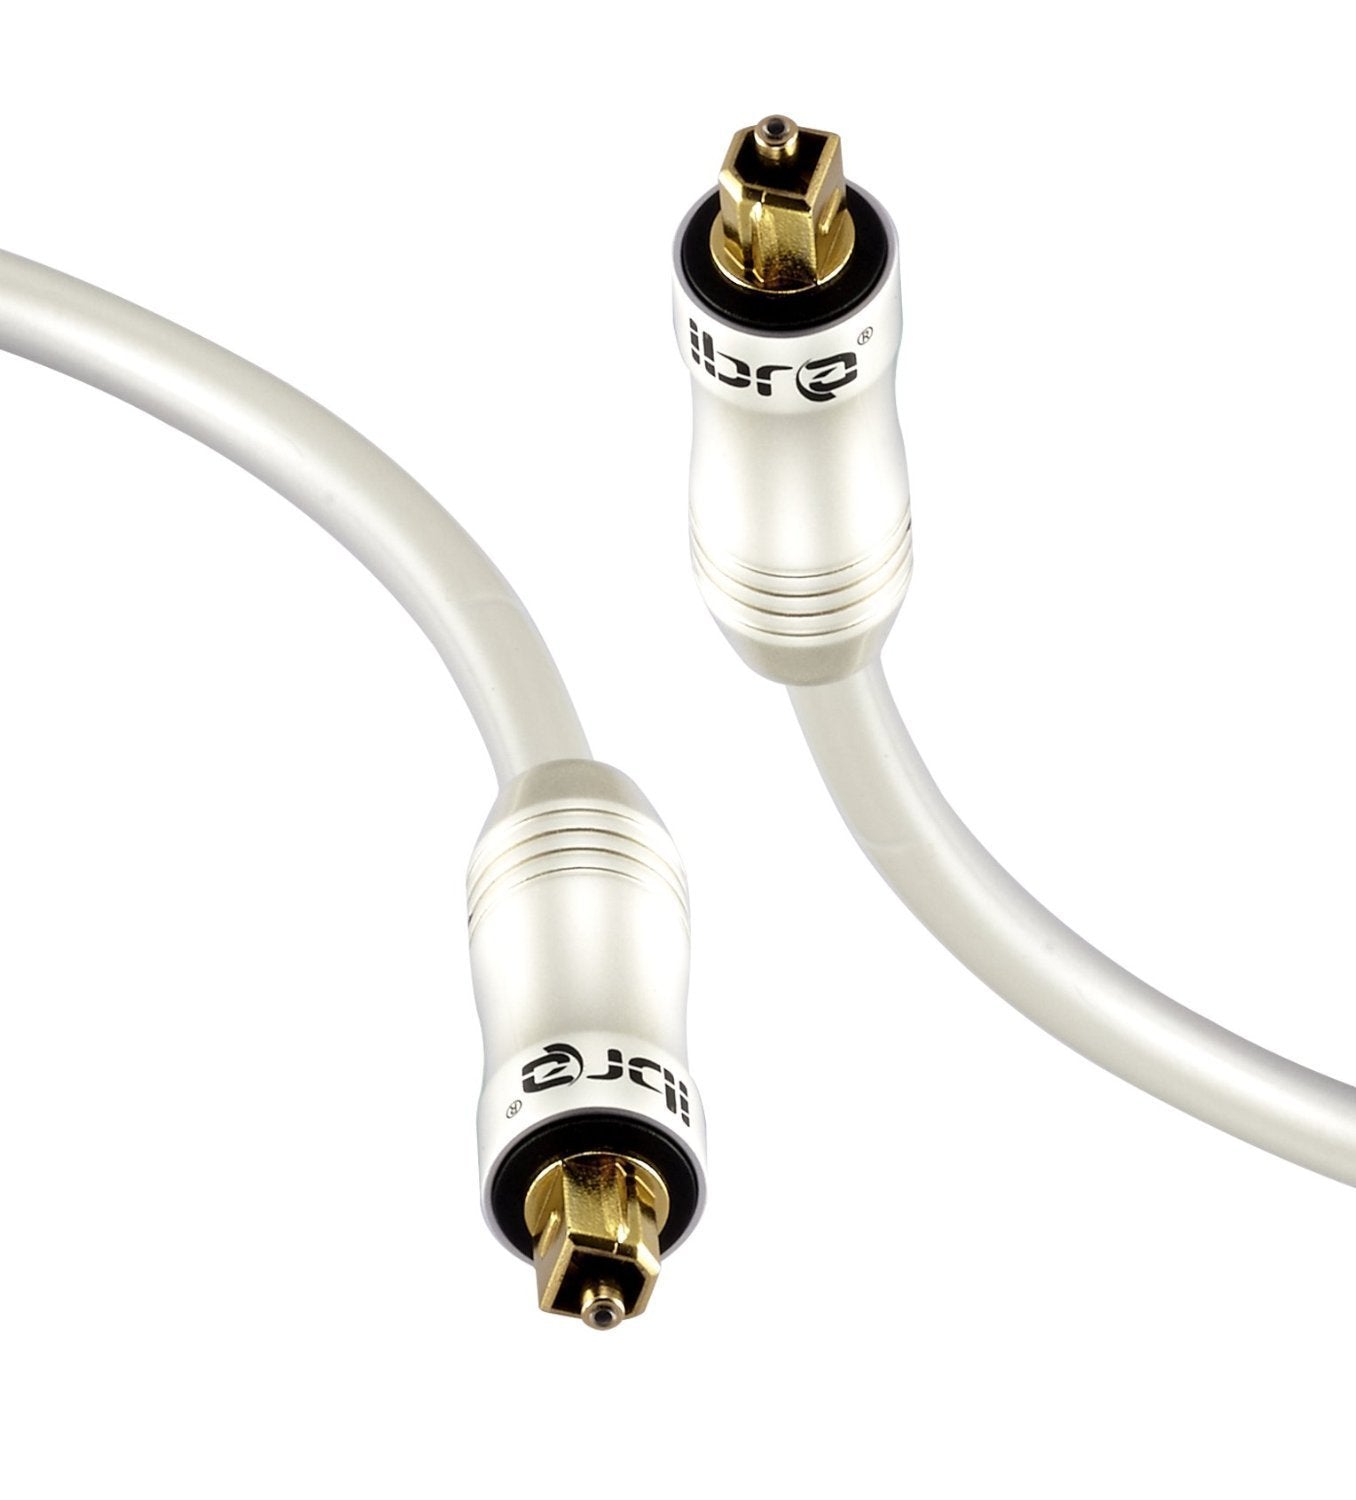 IBRA PEARL 5M - Digital Optical Cable | Toslink / Audio Cable | Fibre Optic Cable | Suitable for PS3, Sky, Sky HD, LCD, LED, Plasma, Blu-ray, AV Amps